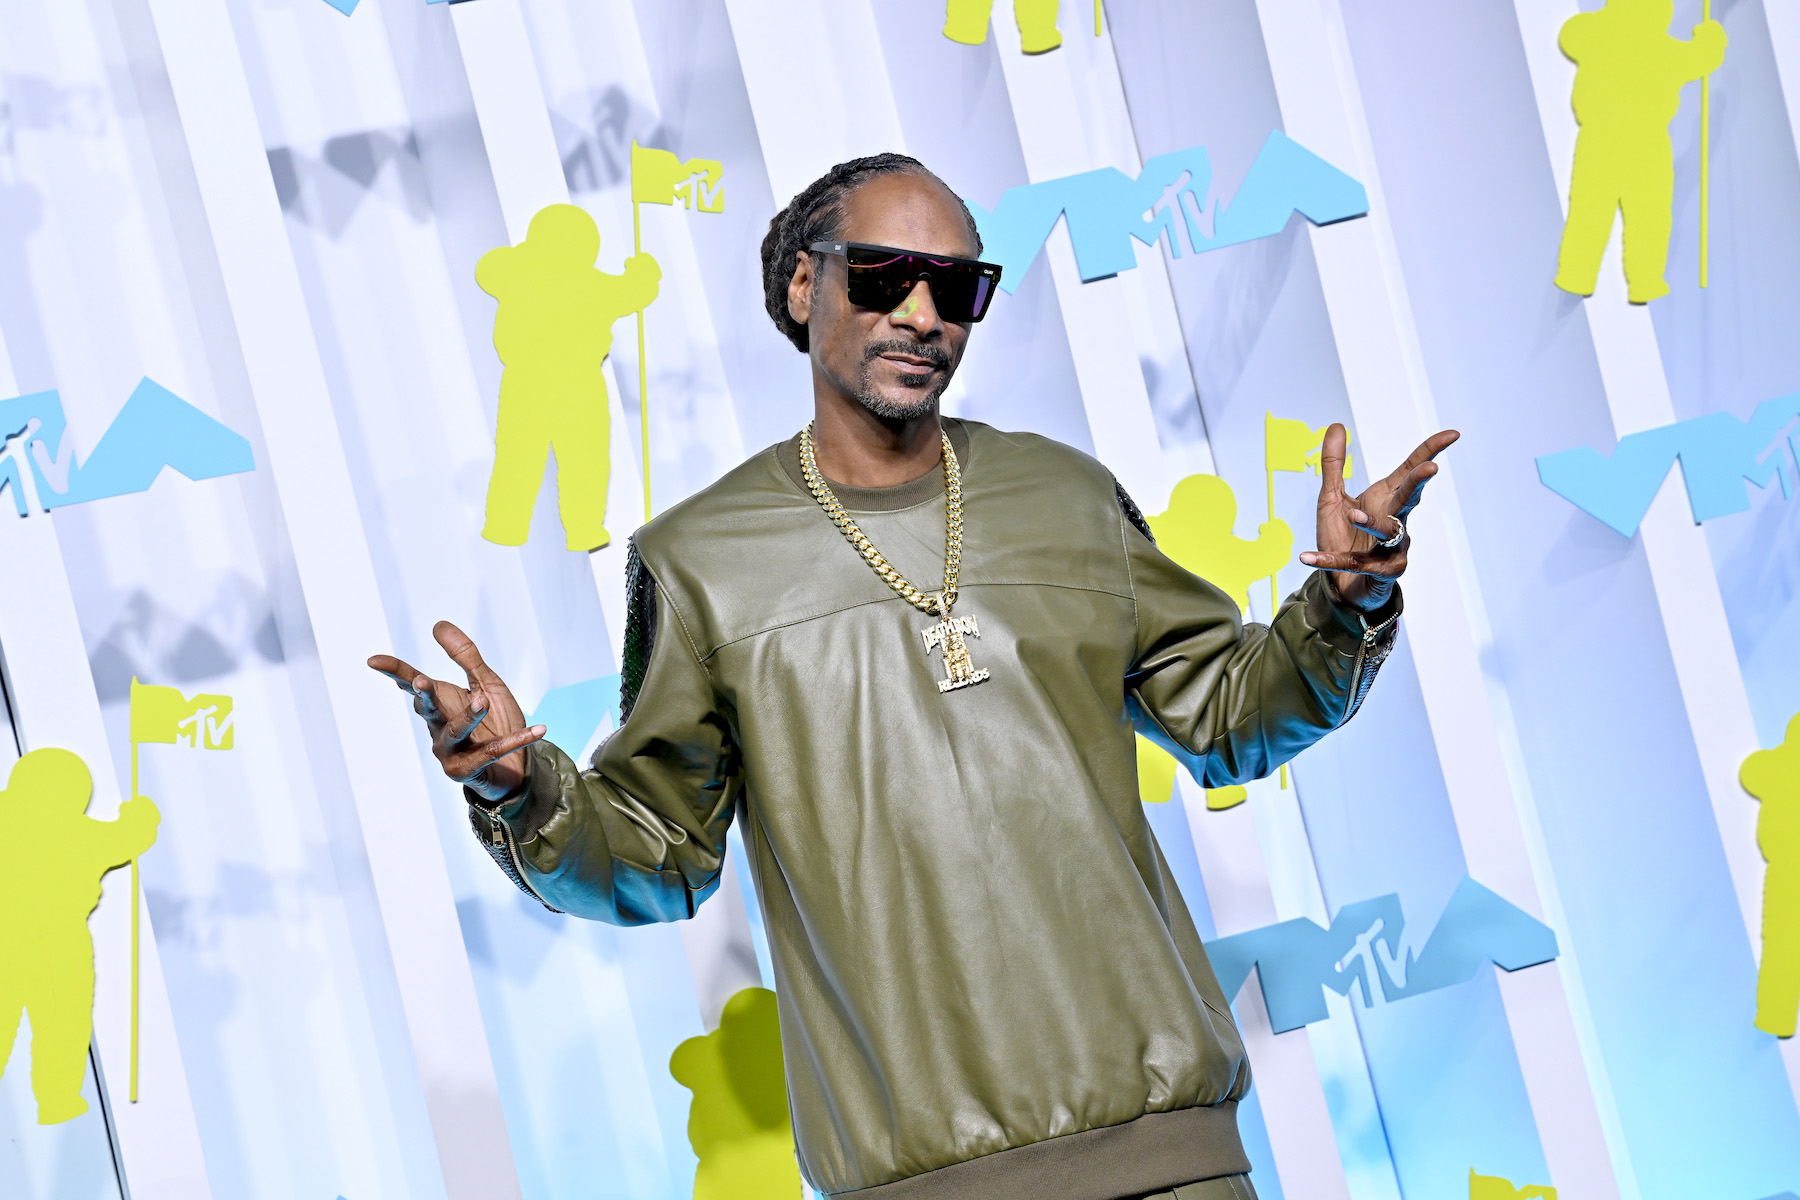 Funko Pop face Snoop Dogg posing for a photo wearing a green sweater